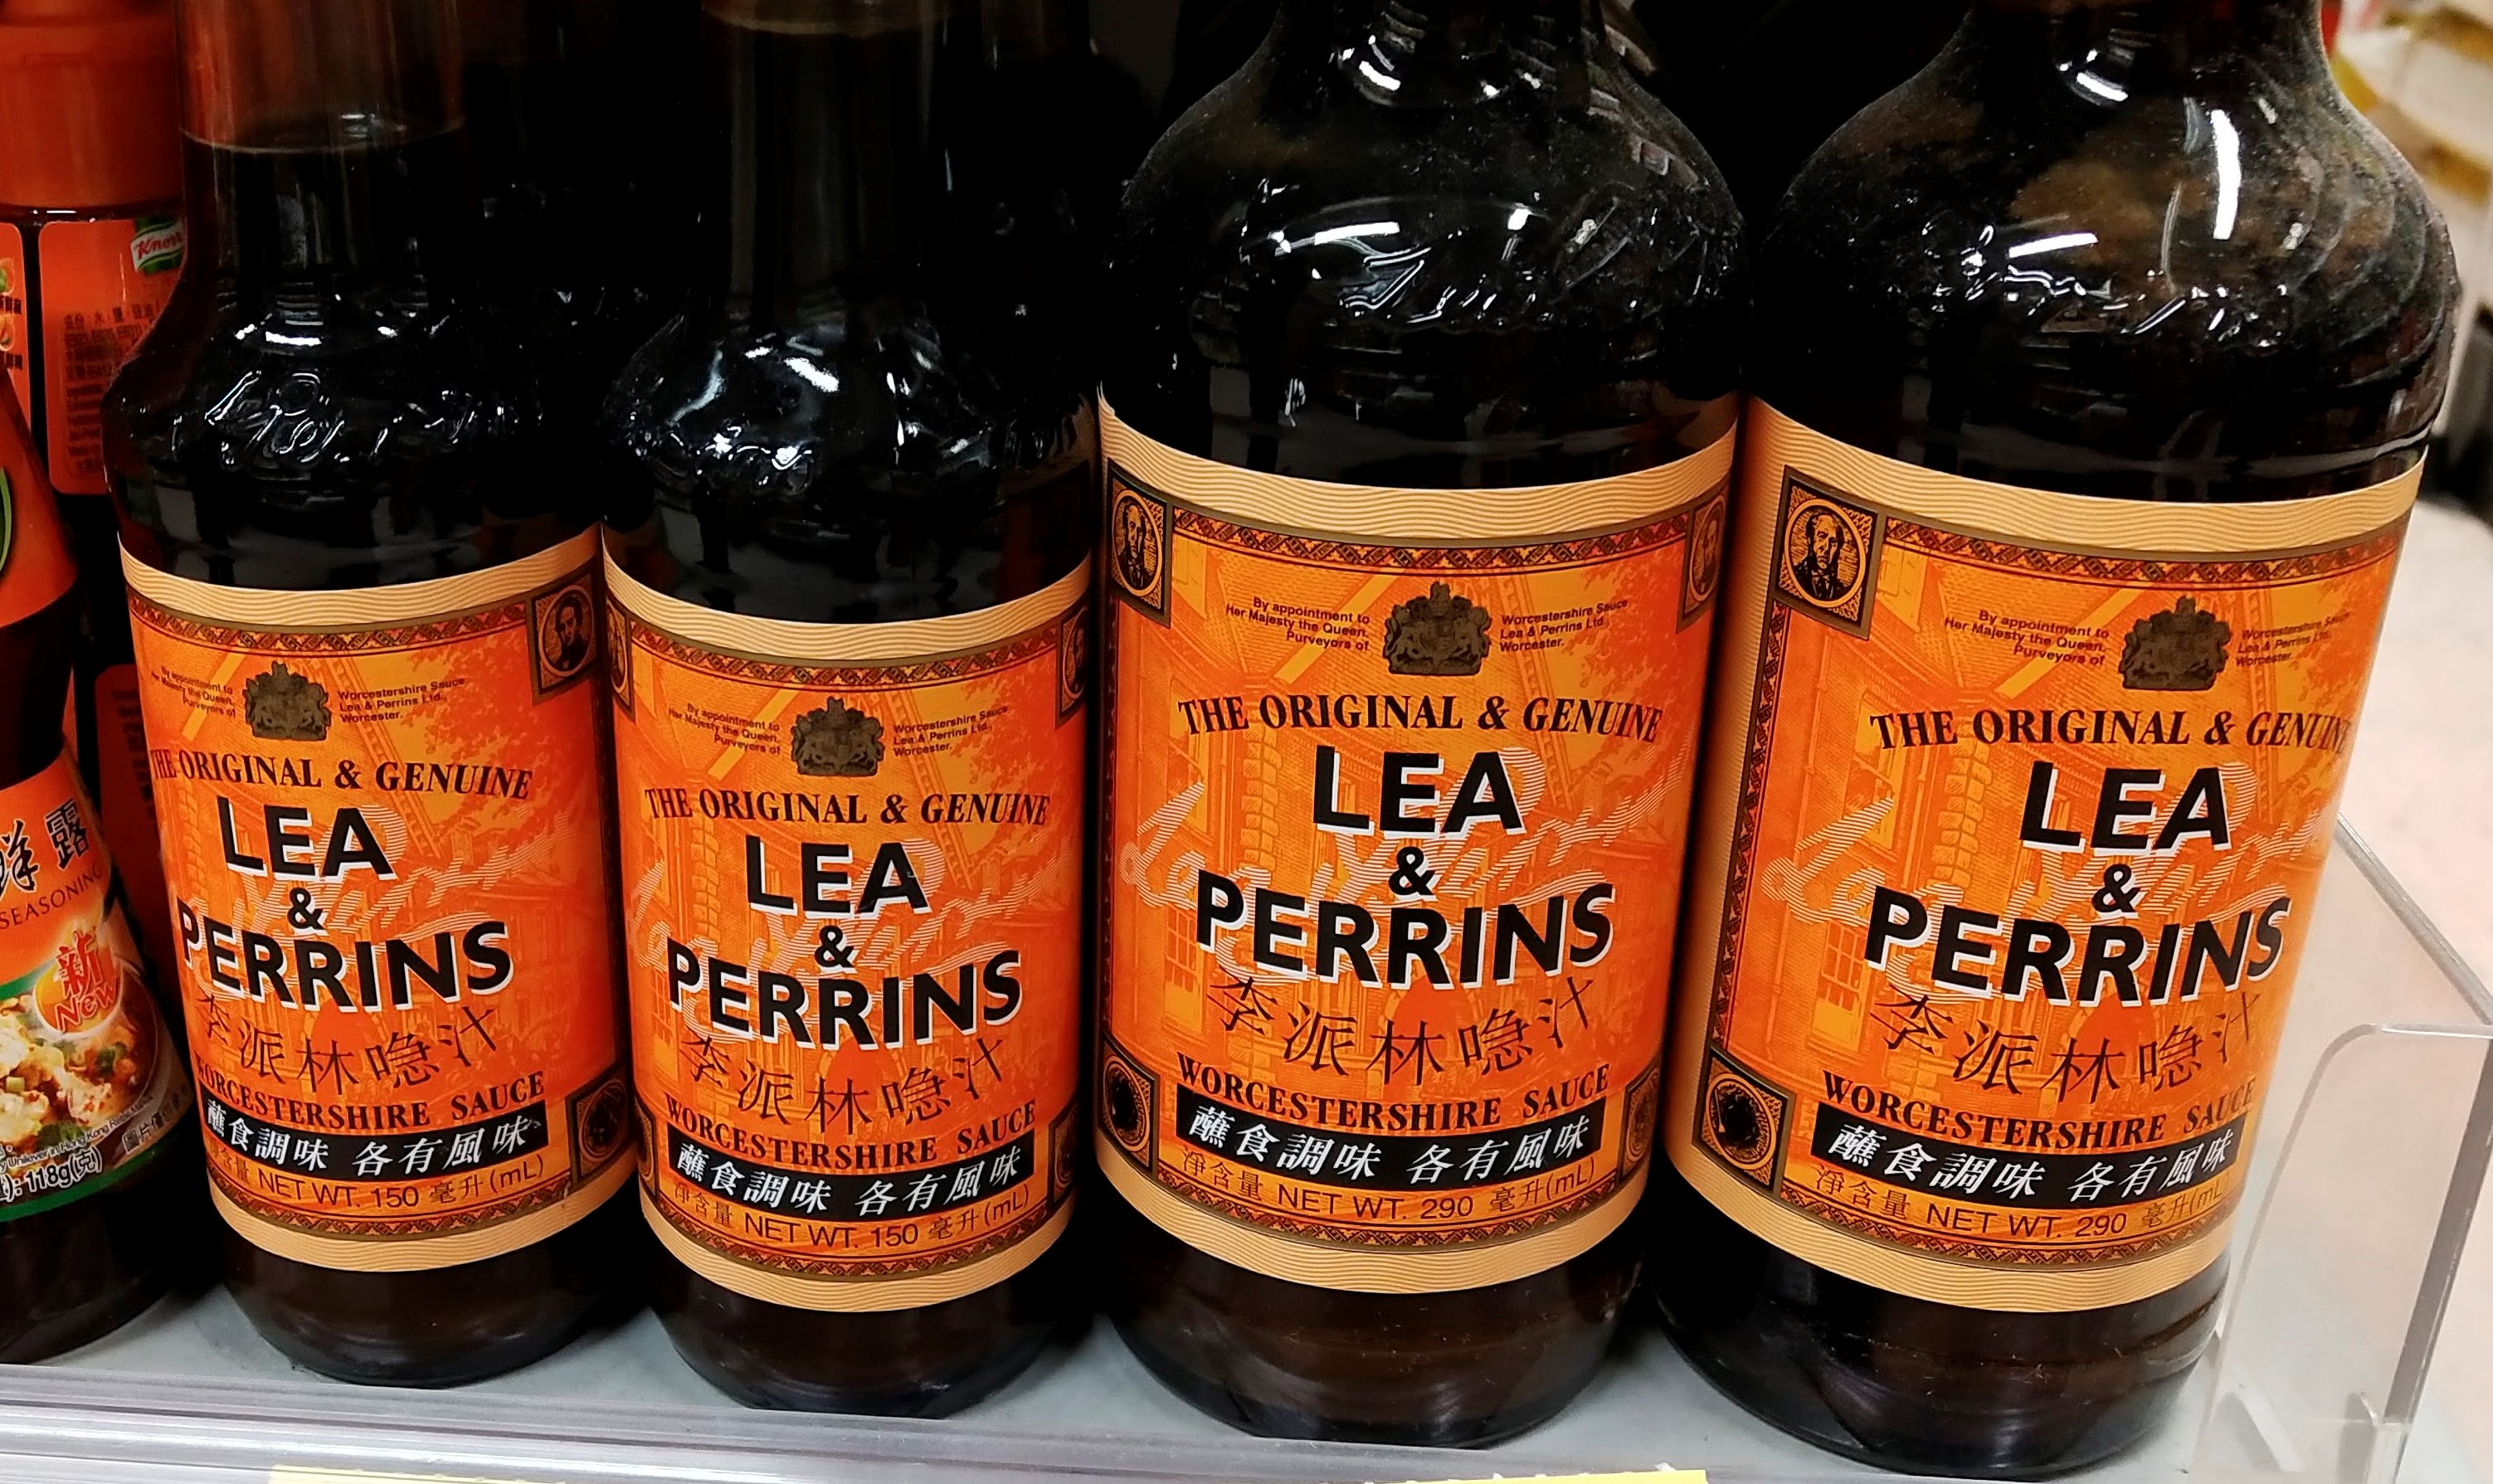 Bottles of Worcestershire sauce